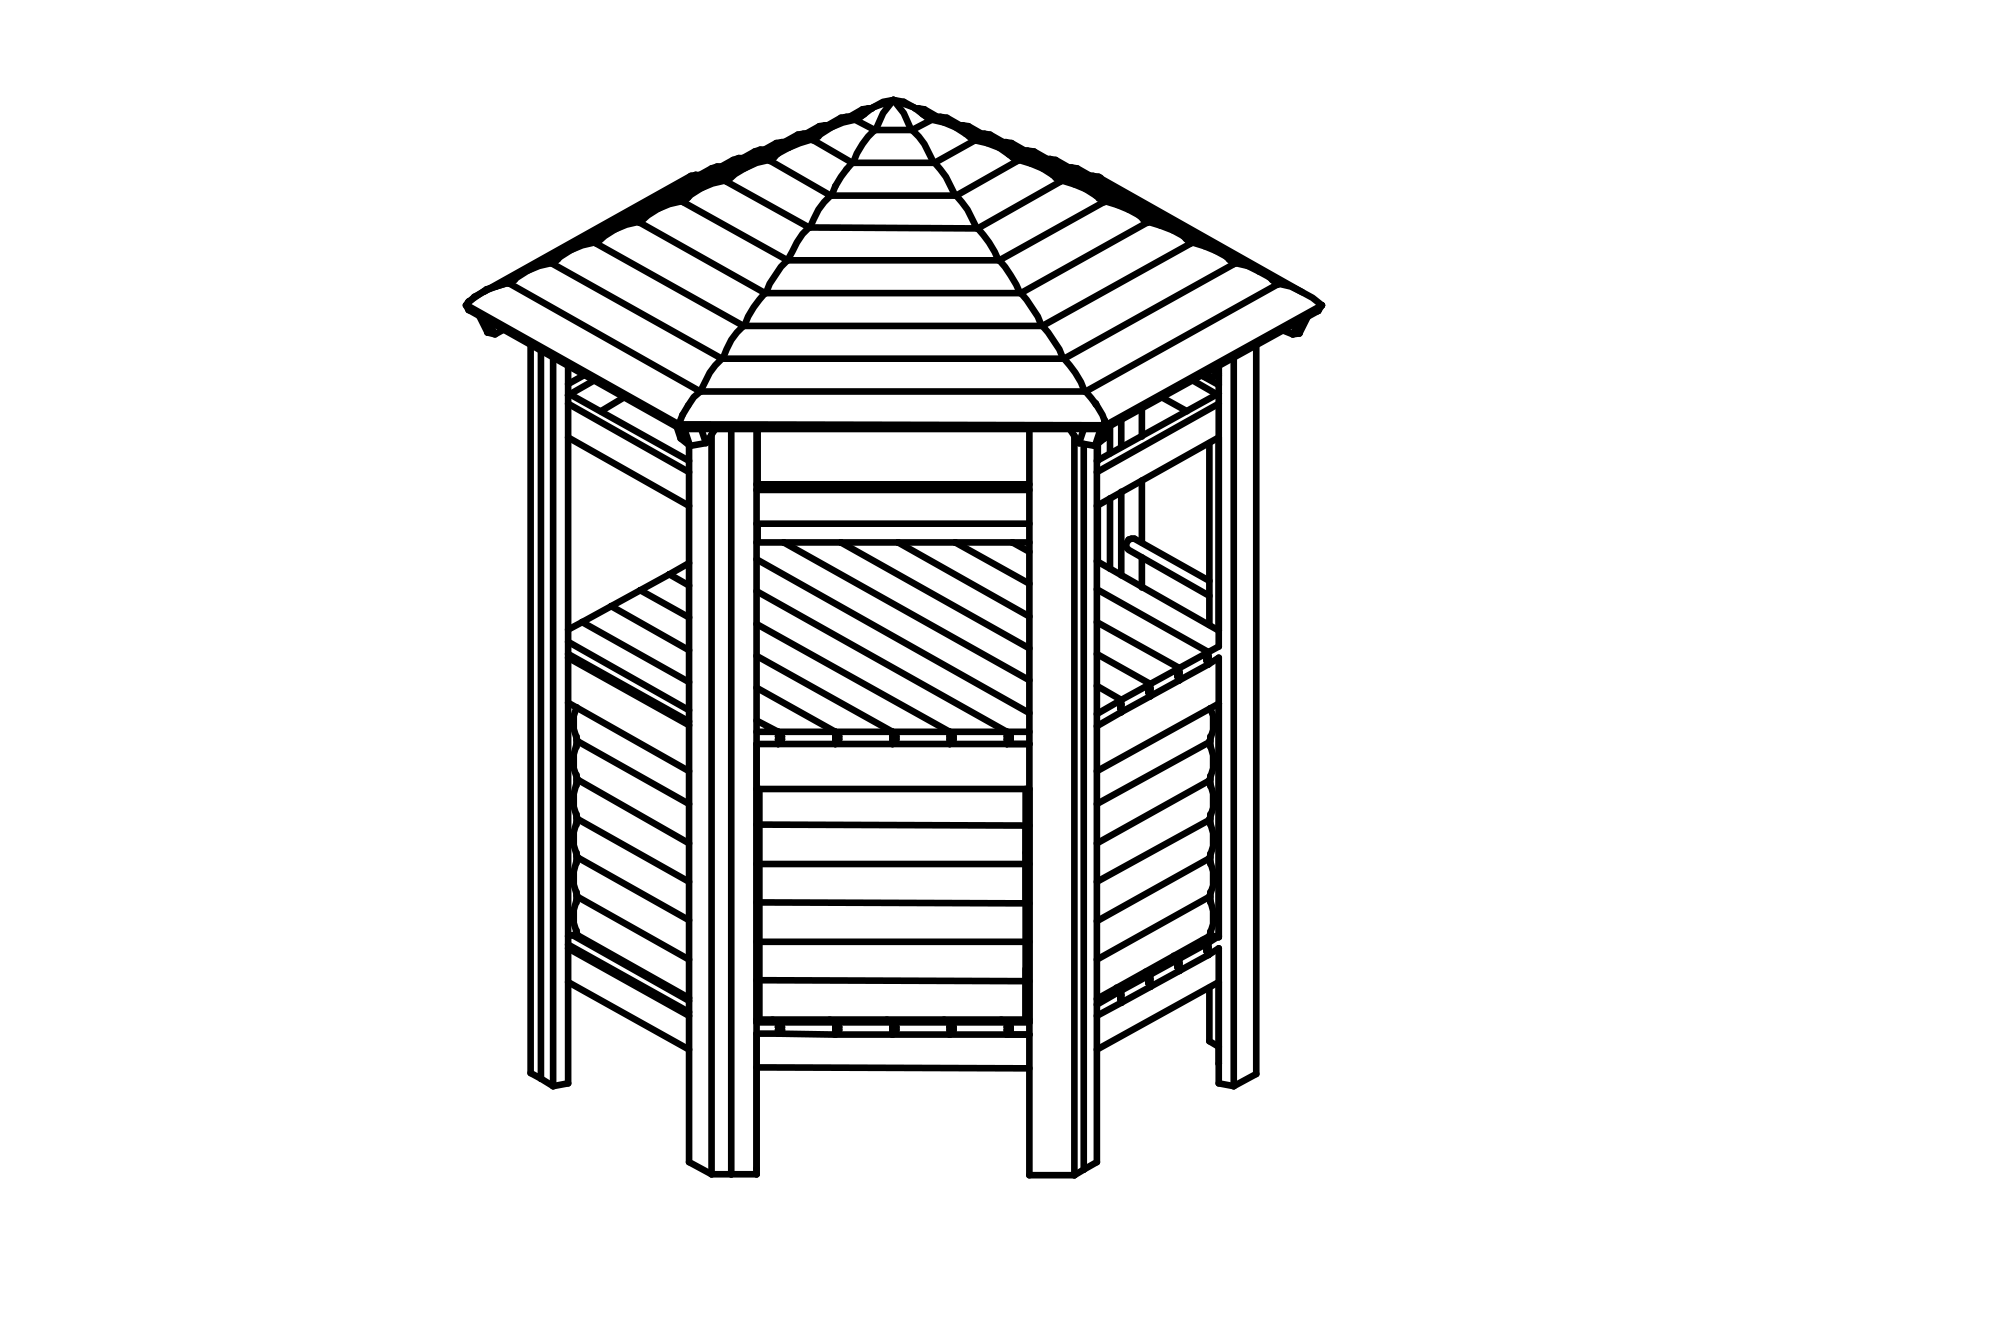 Hexagonal Hut with roof, walls and bench